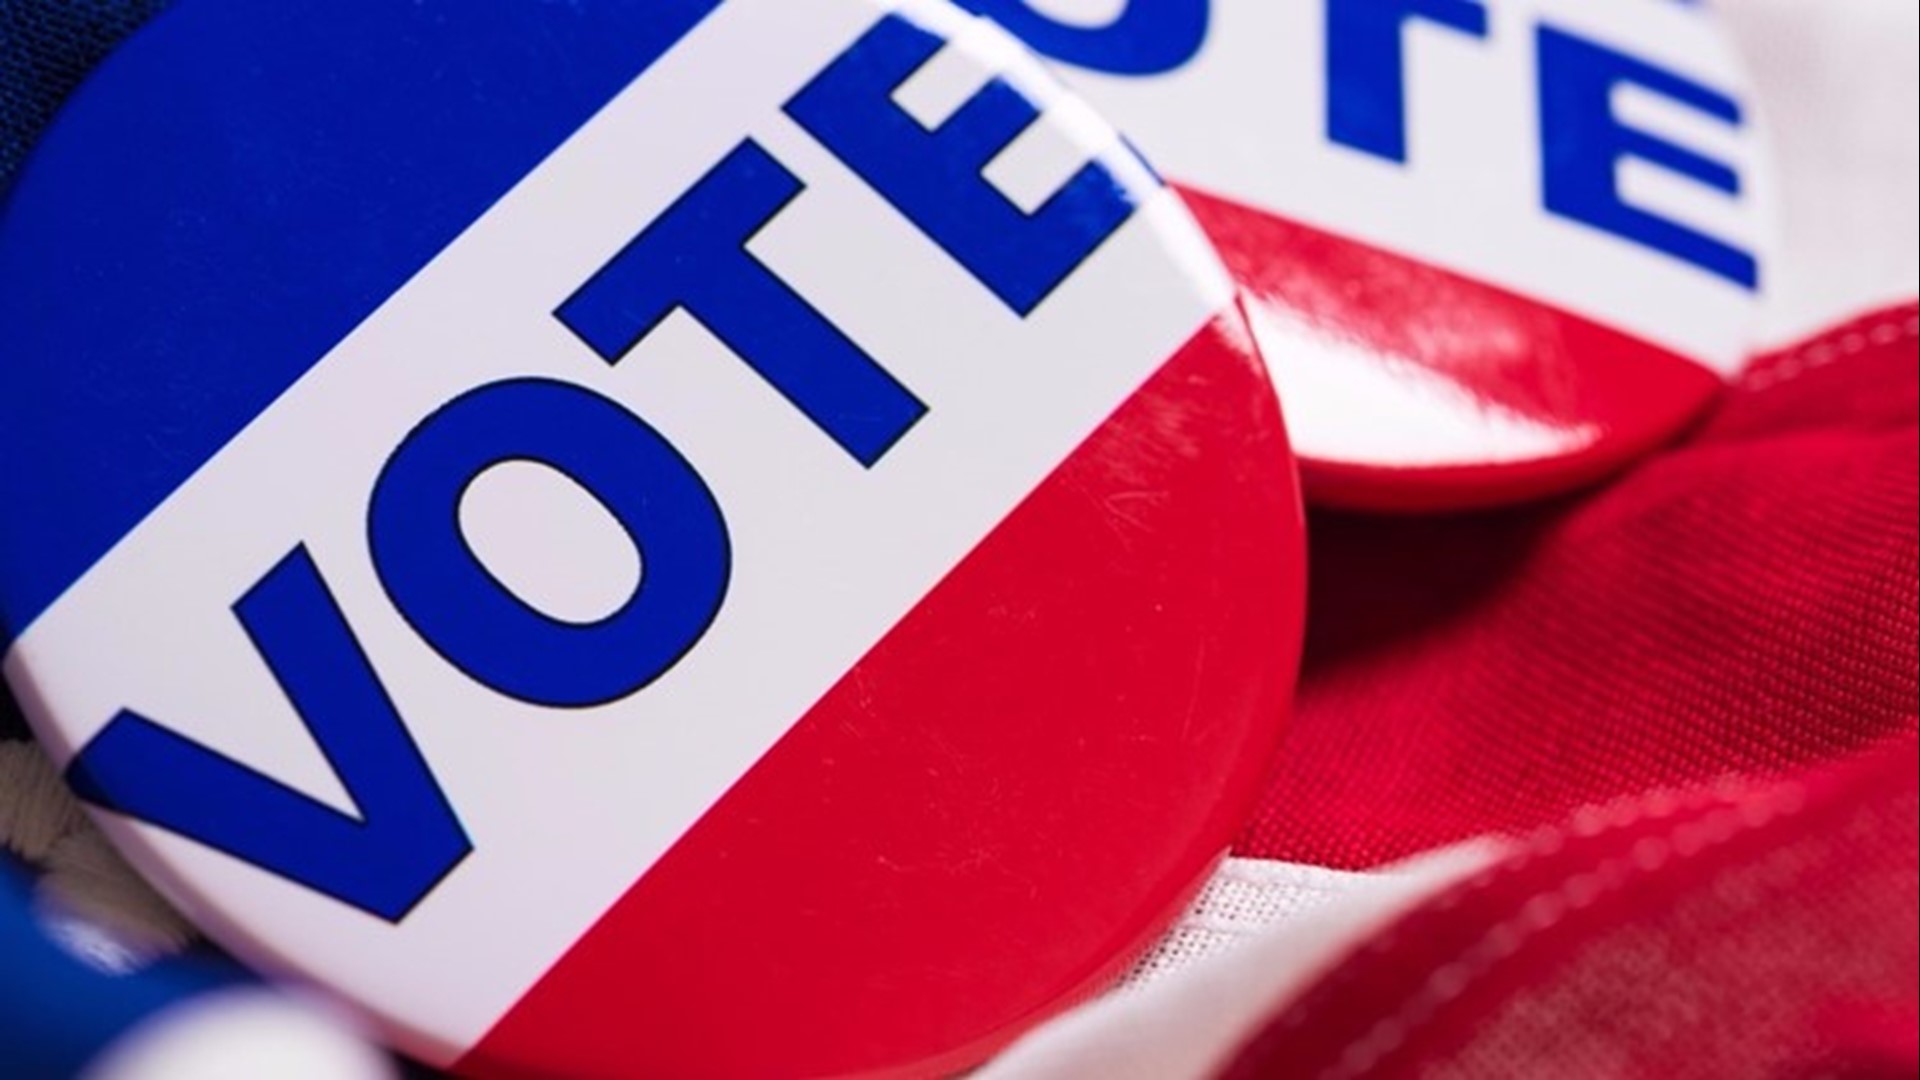 Election Day is Tuesday, November 2 and polls are open from 7 a.m. to 7 p.m.